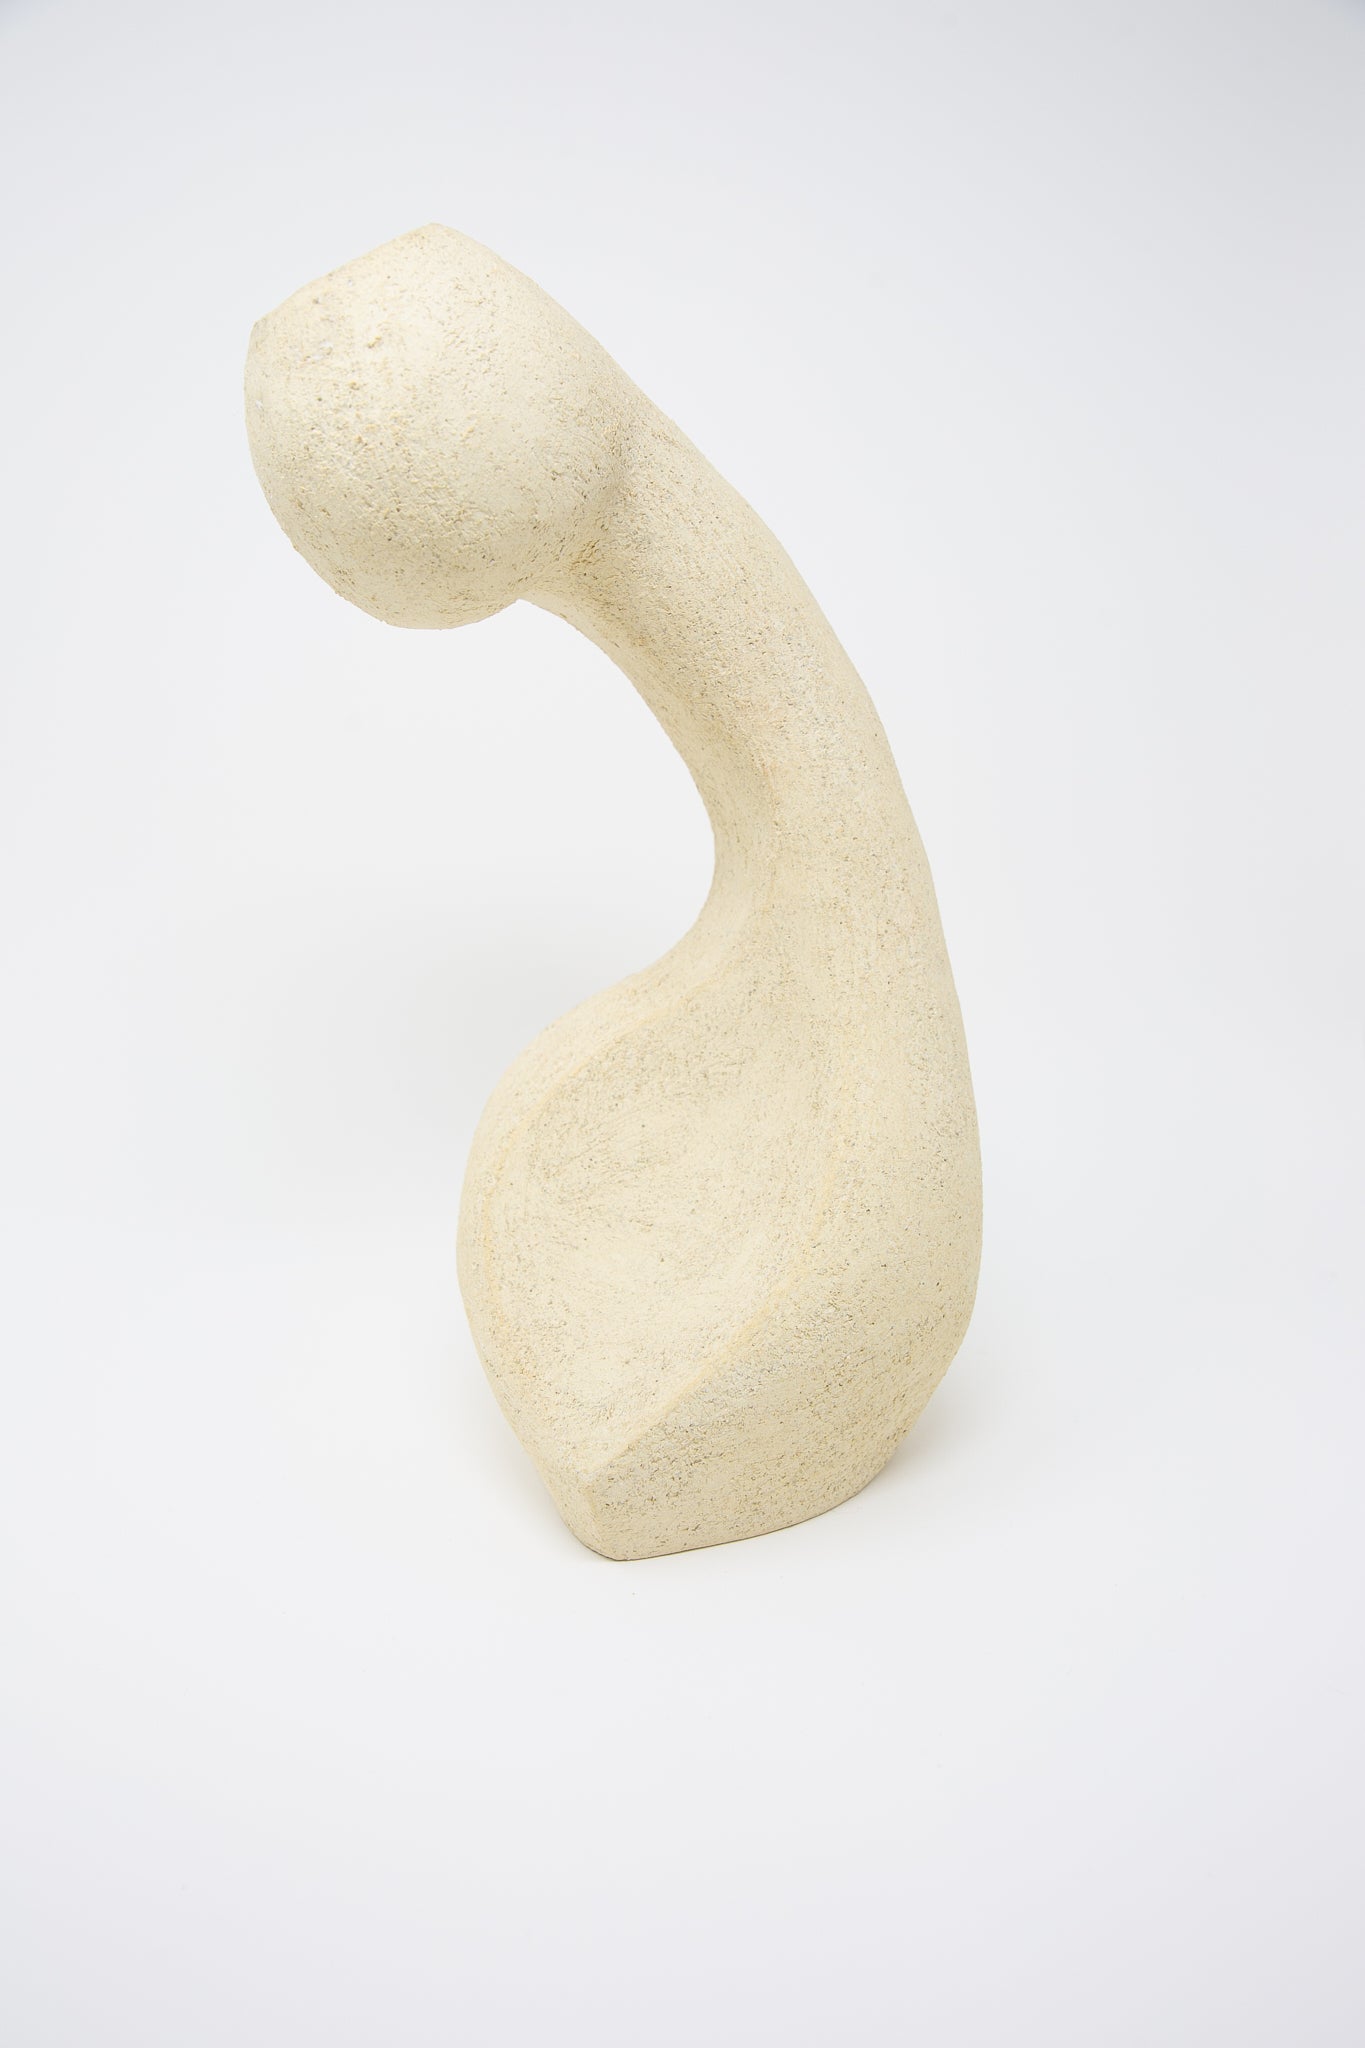 A Large Hand Built Vessel No. 000711 Bud Vase by Lost Quarry, textured white sculpture on a white background.